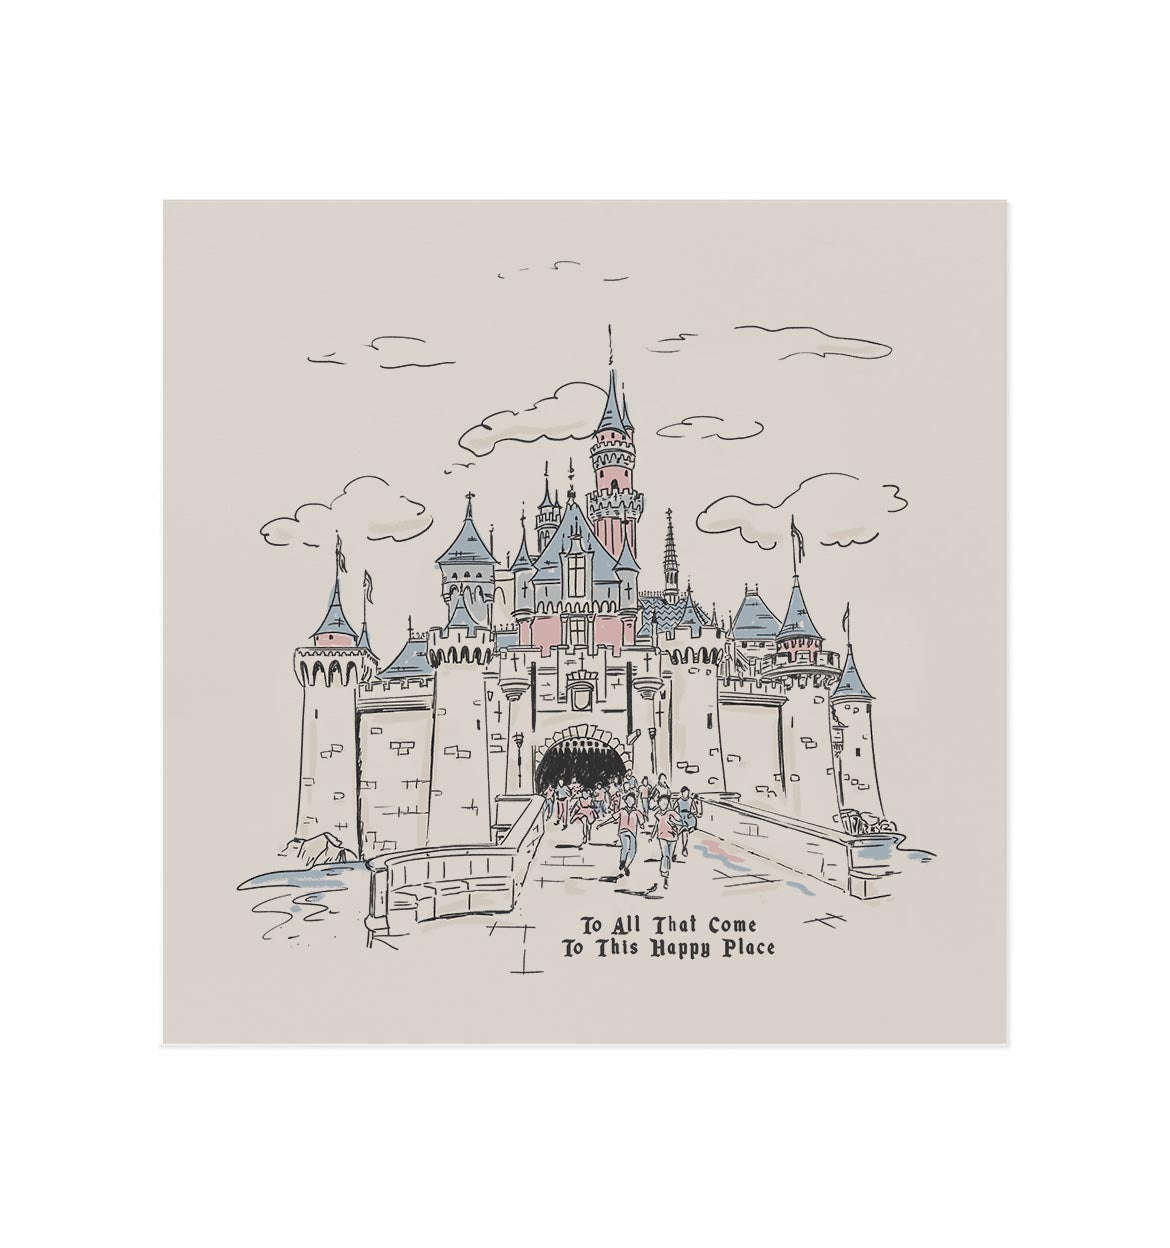 Opening Day Castle Art Print